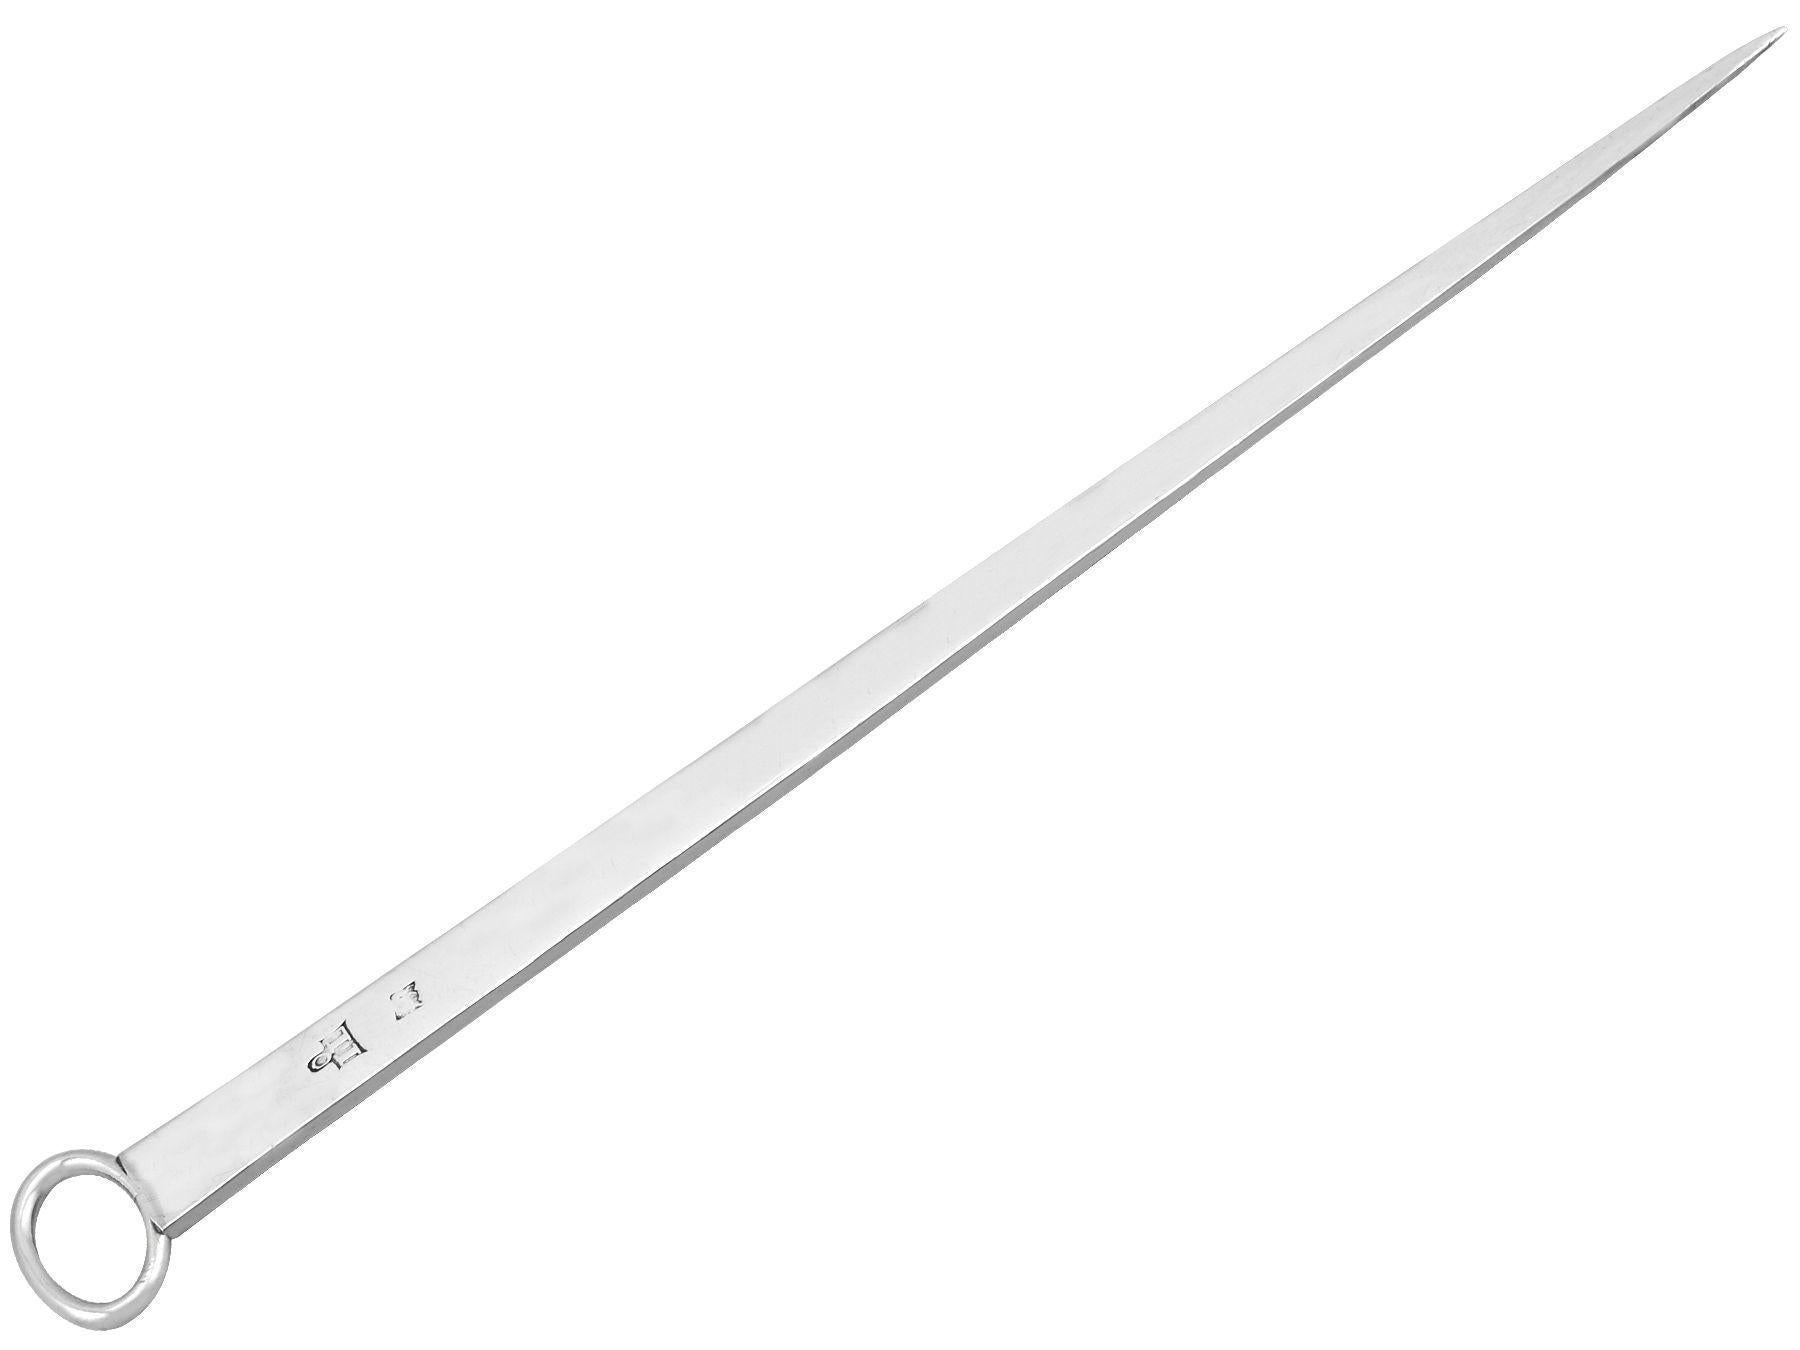 An exceptional, fine and impressive antique Georgian Newcastle sterling silver meat skewer/letter opener; an addition to our diverse 18th century flatware collection

This antique Georgian sterling silver meat skewer/letter opener* has a tapered